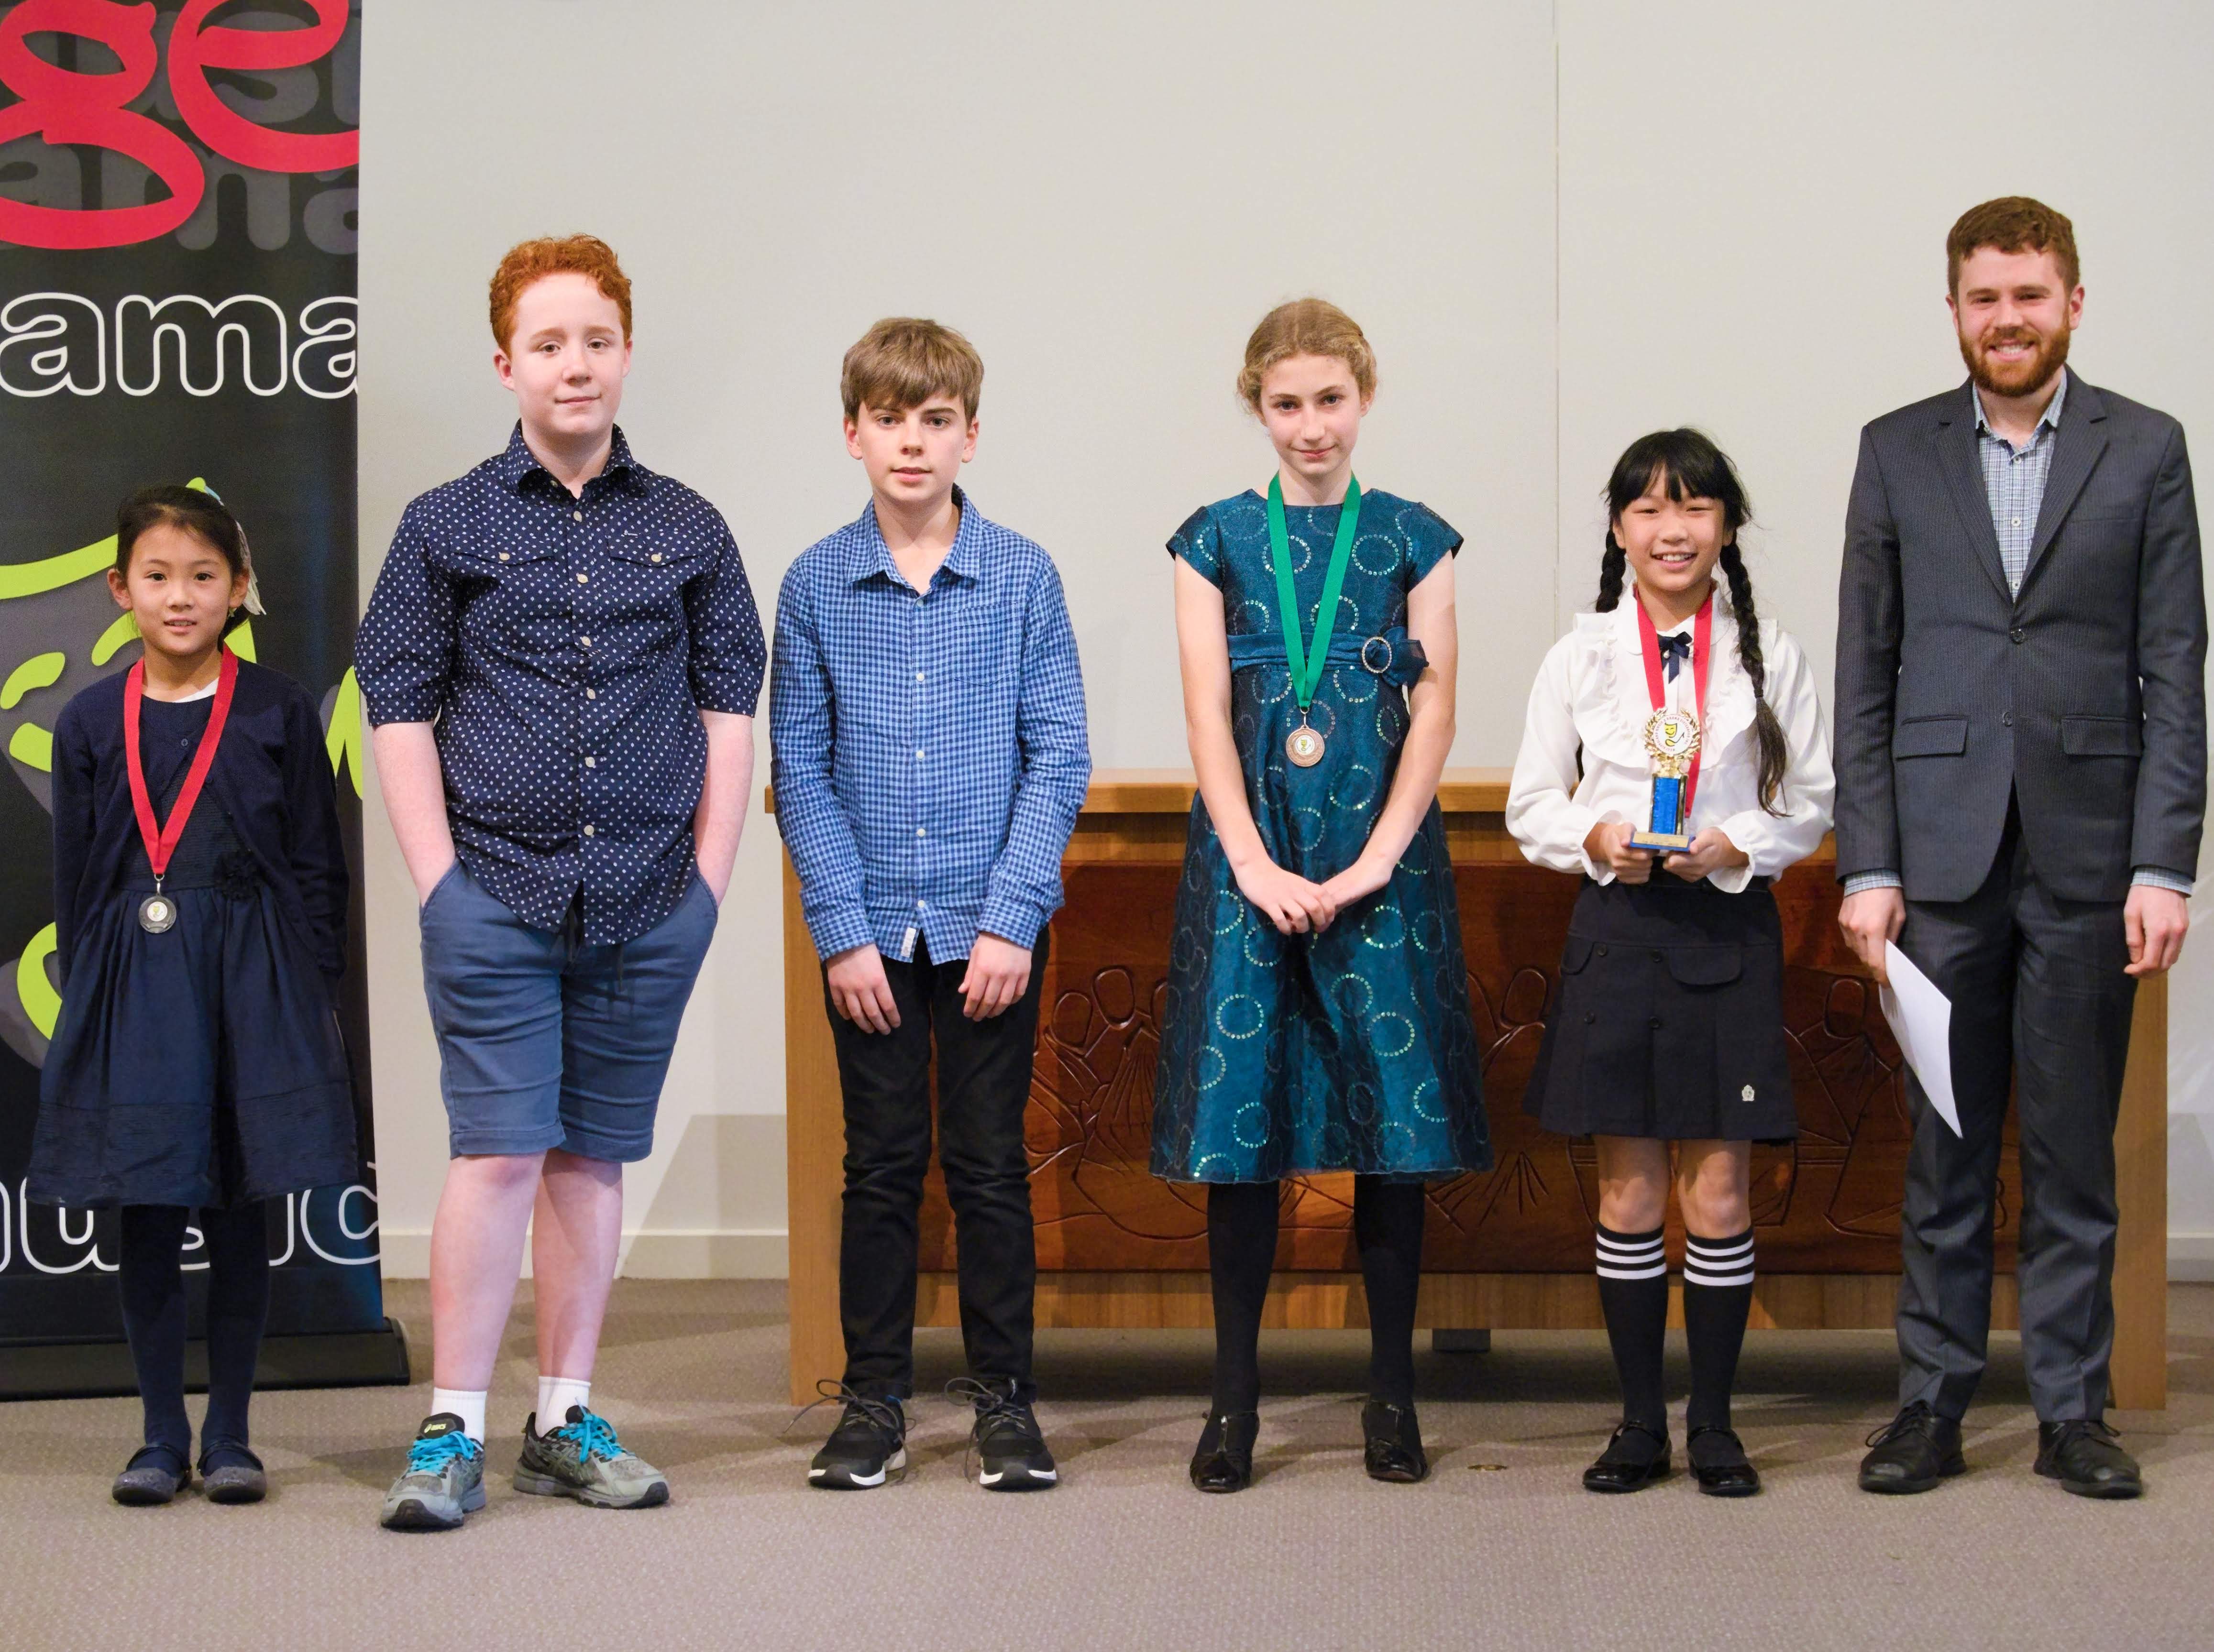 WGE Instrumental S4.08 1st Erika Lee, 2nd Tracy Zhao, 3rd Adele Gillam, HM Aaron Hoogendoorn & Max O'Connor